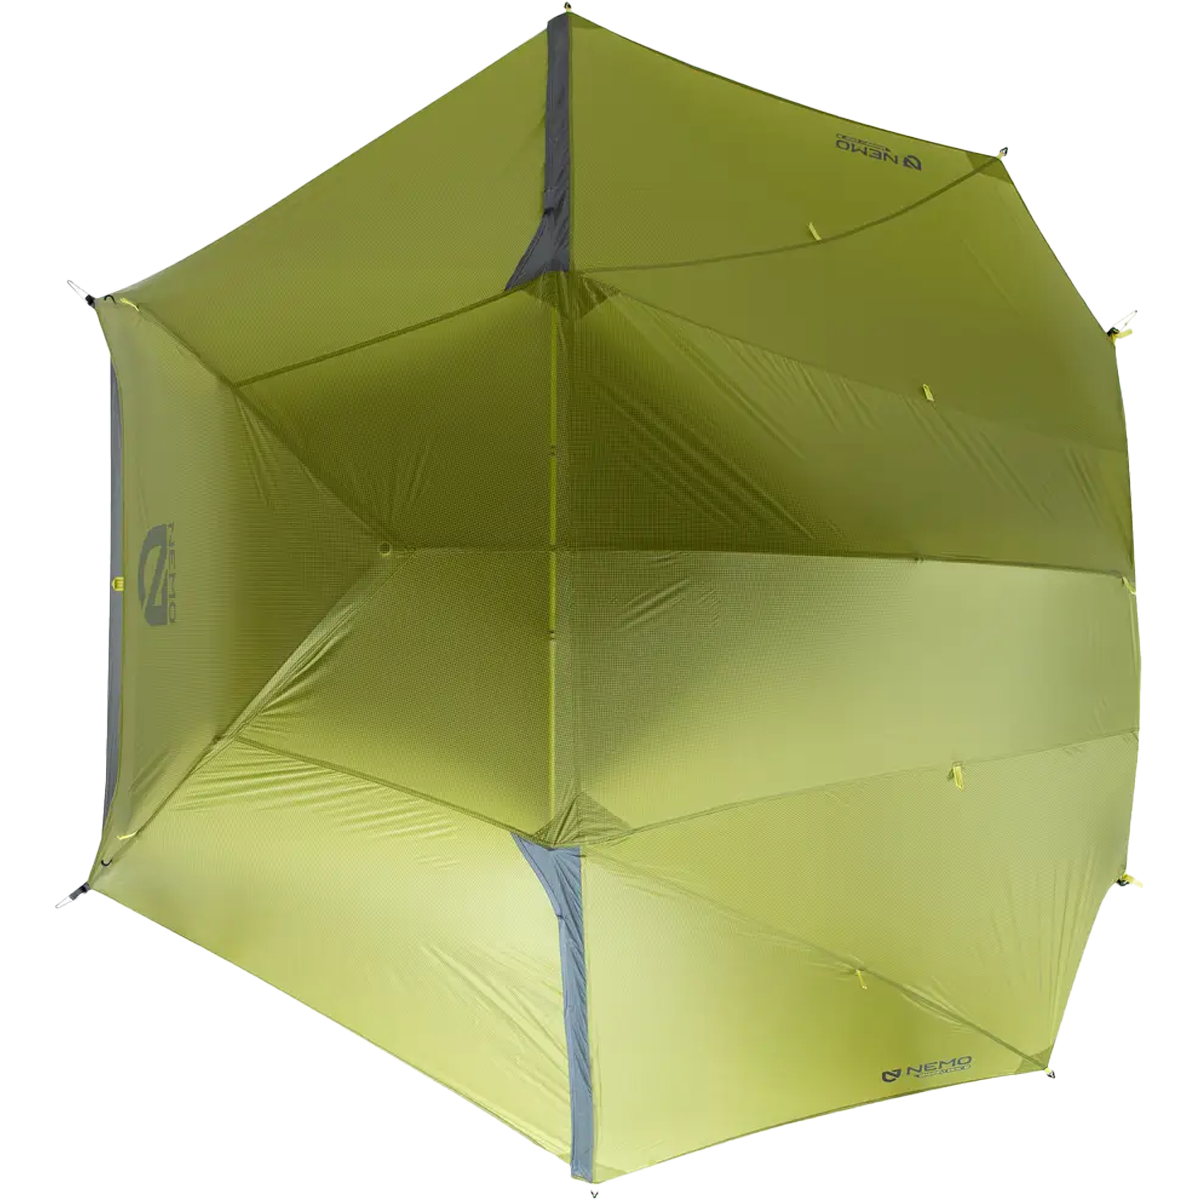 Dragonfly OSMO Ultralight 3 Person Tent alternate view